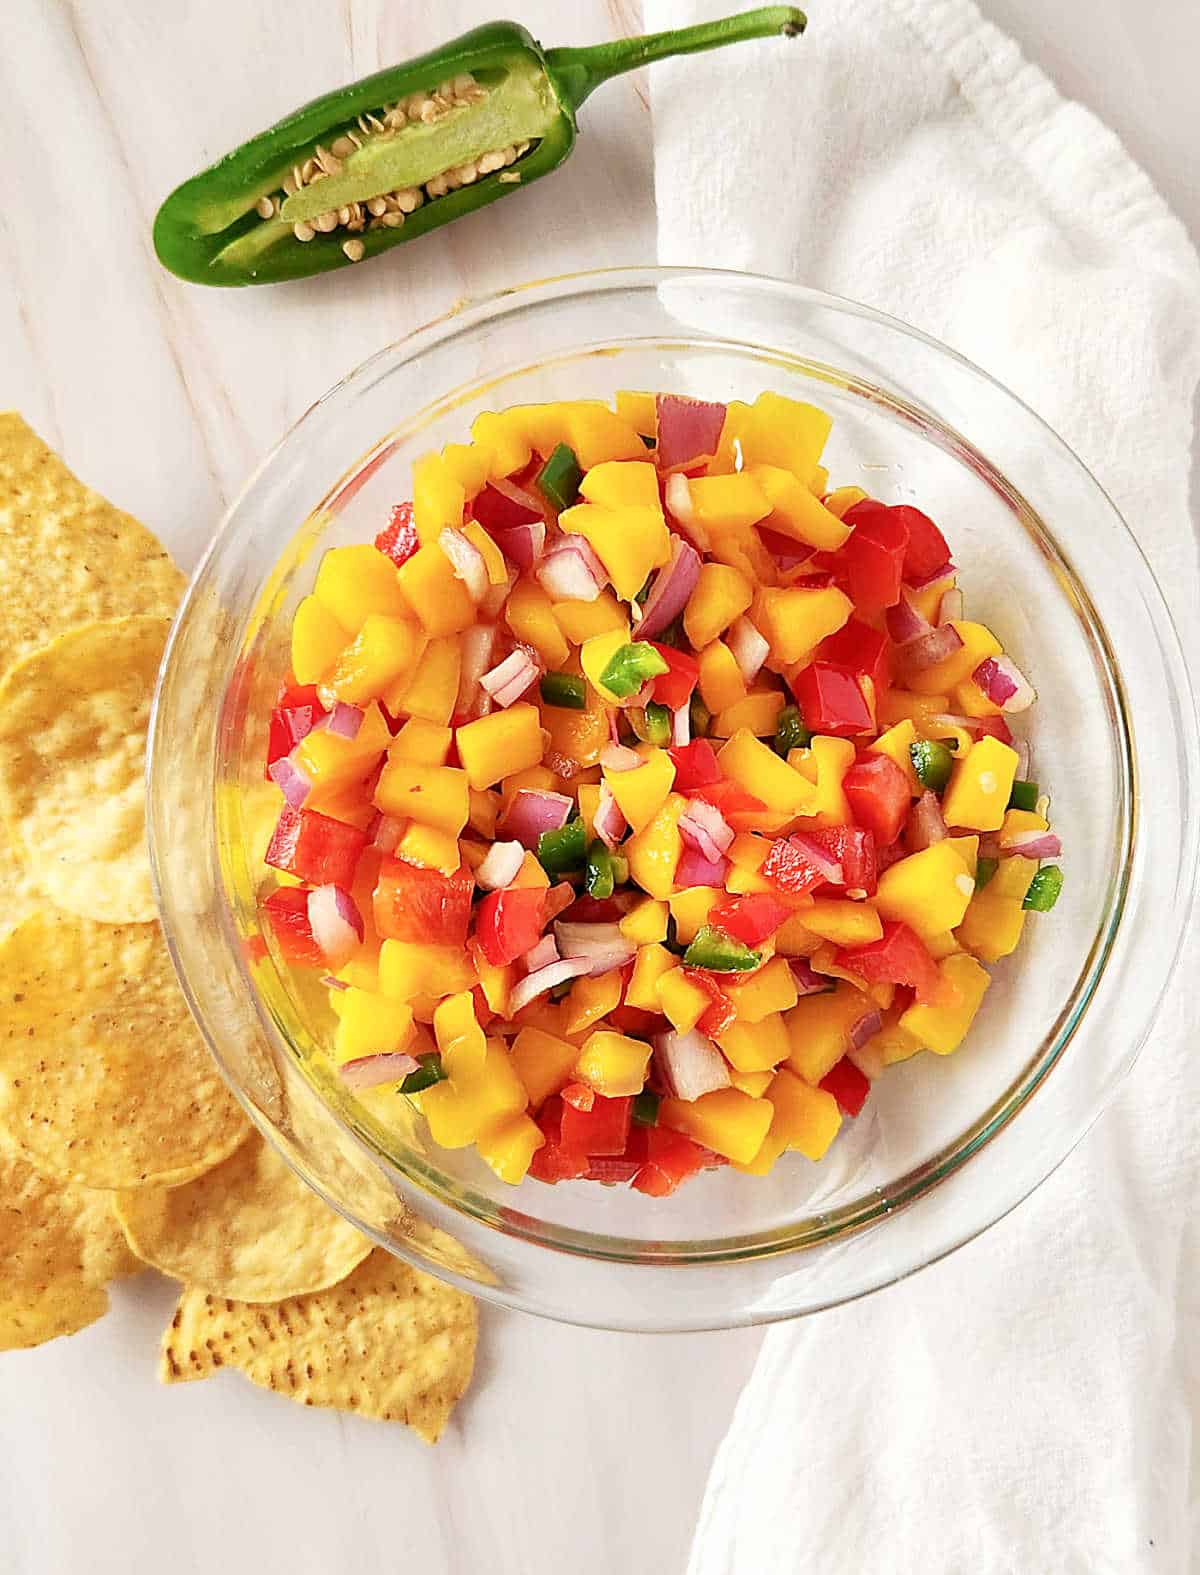 Top view of peach mango salsa in a glass bowl, white cloth, corn chips, half jalapeno pepper. White surface.